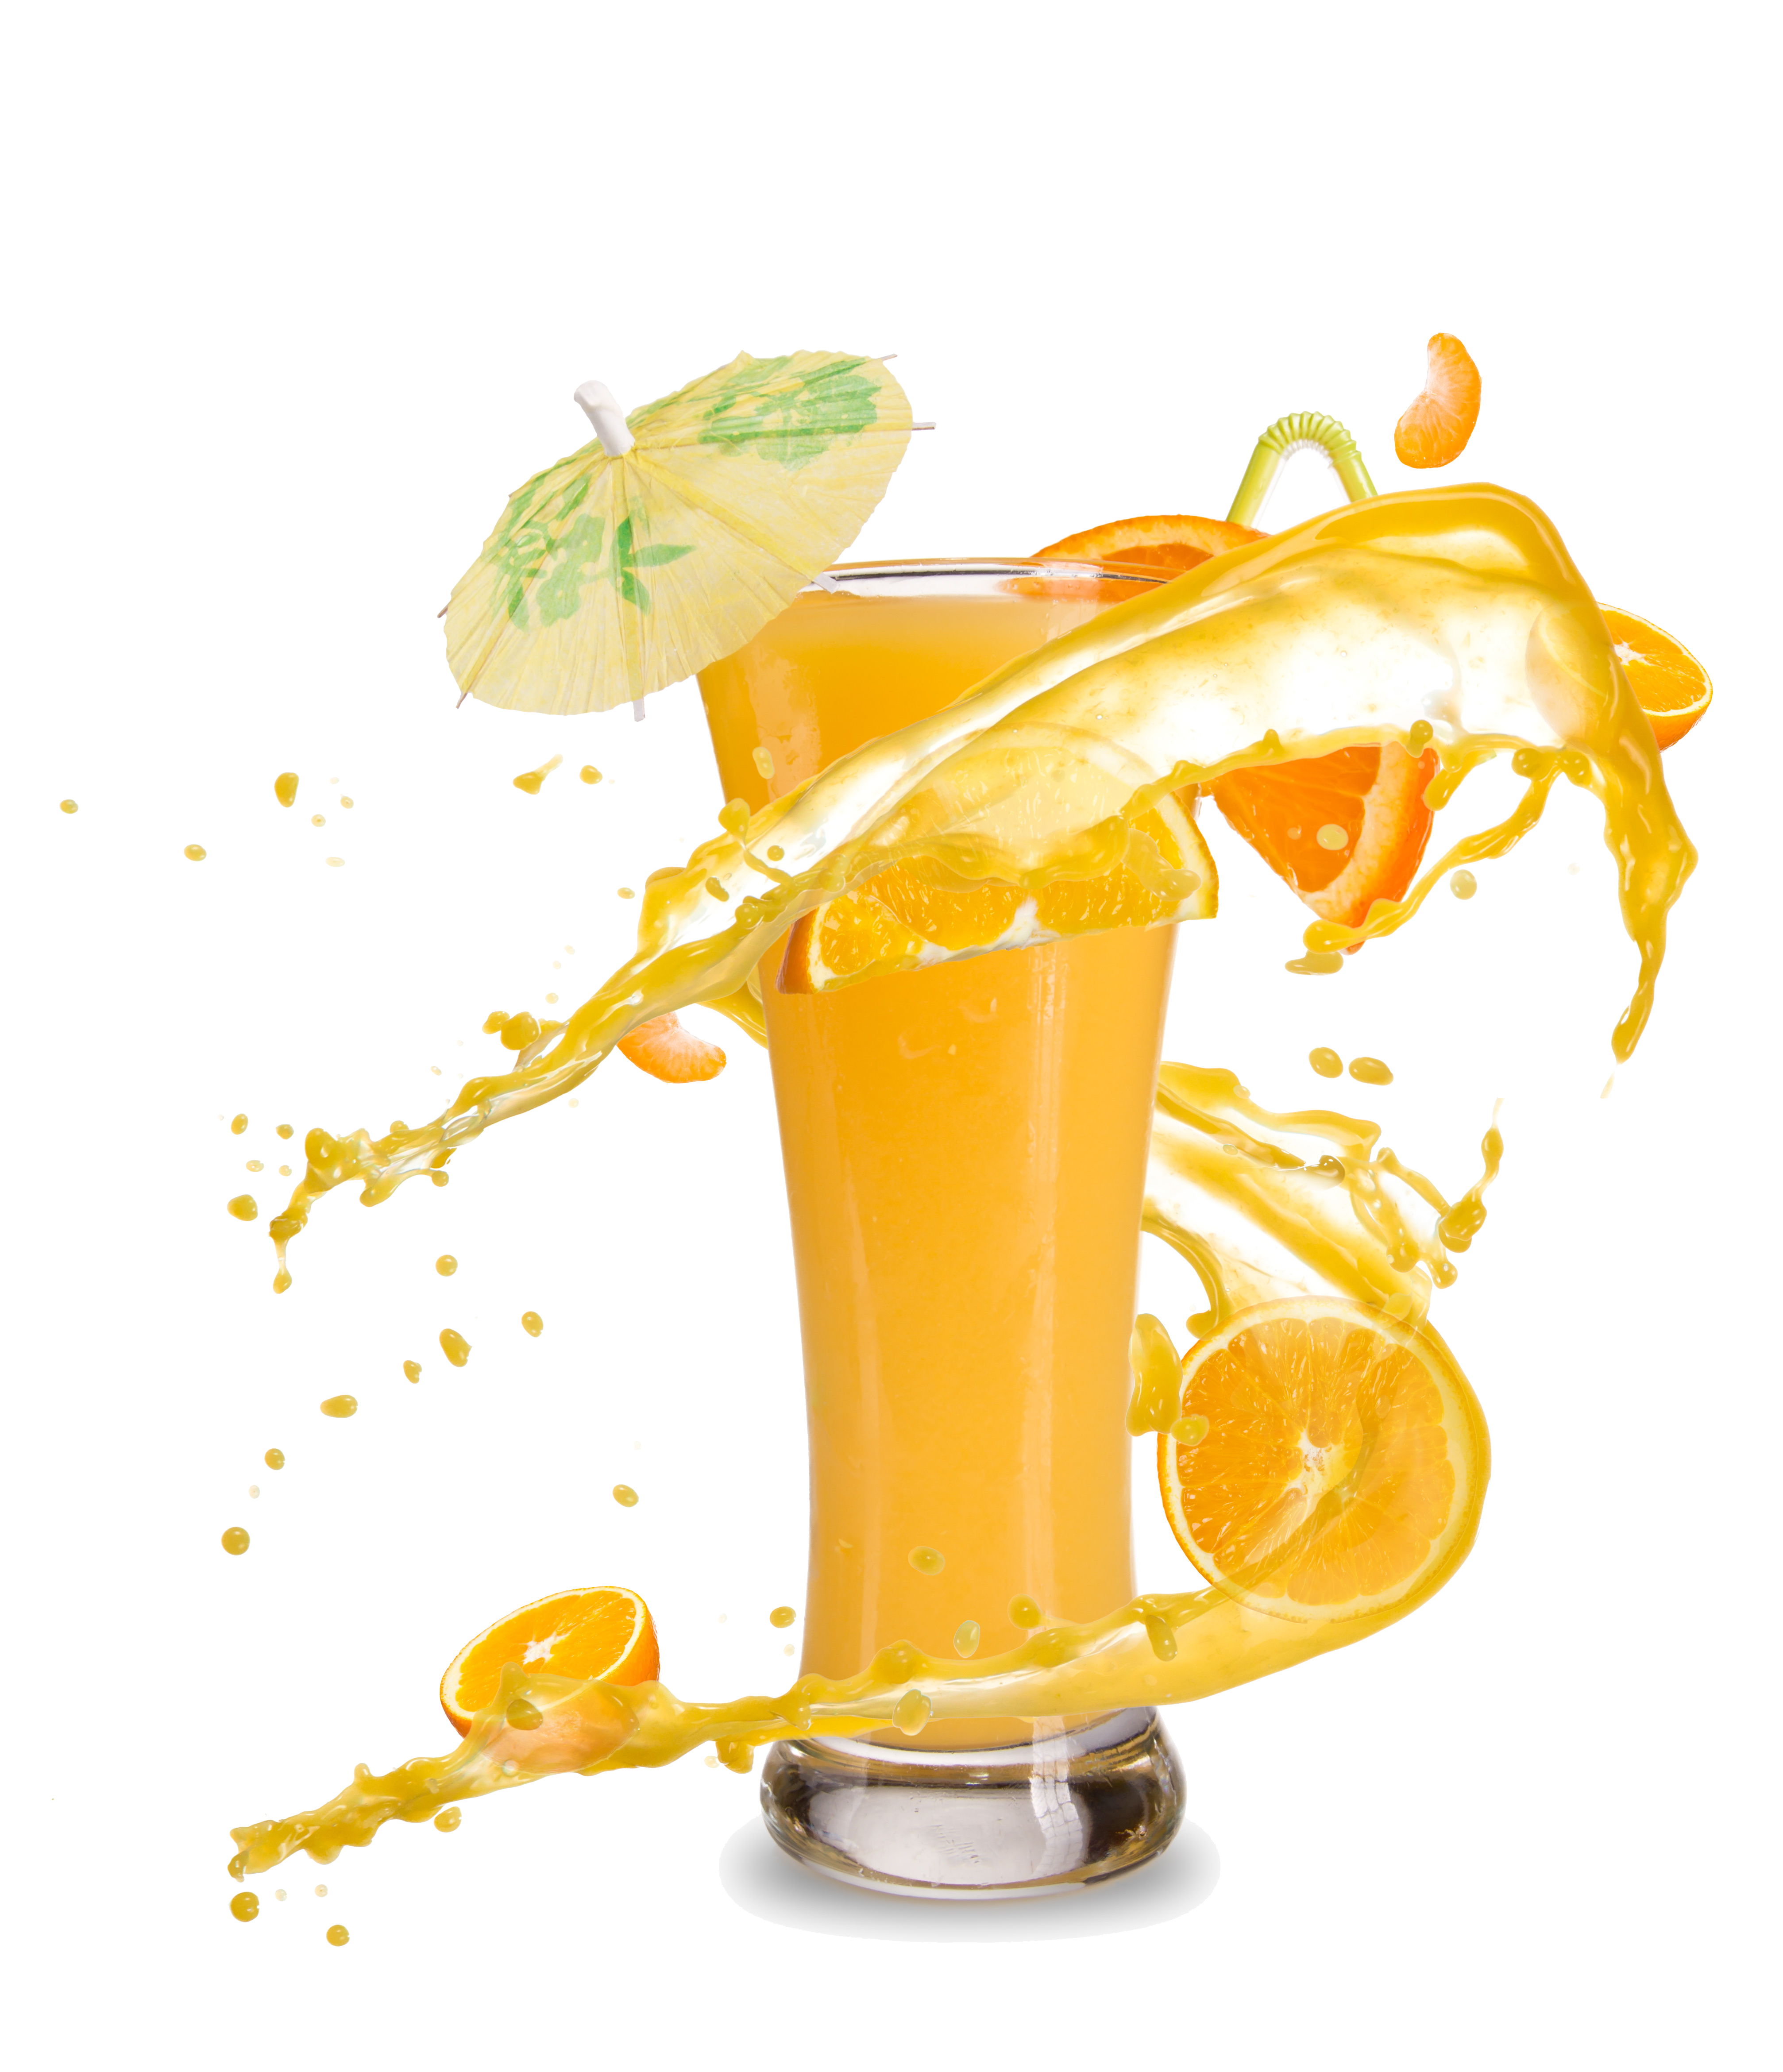 juice clipart cool drink